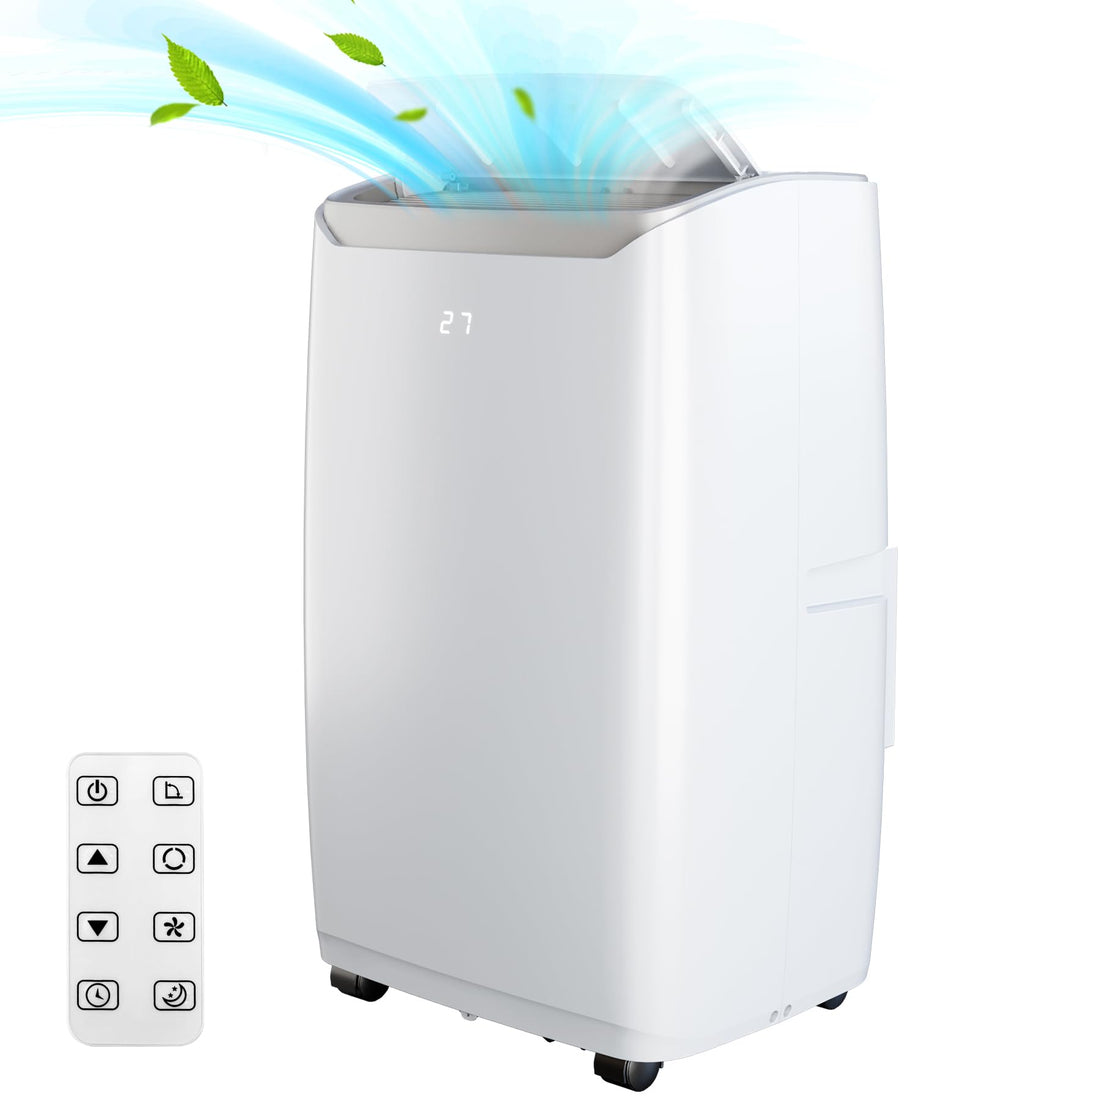 12,000 BTU Portable AC, Multi-Speed Fan for Room Cooling